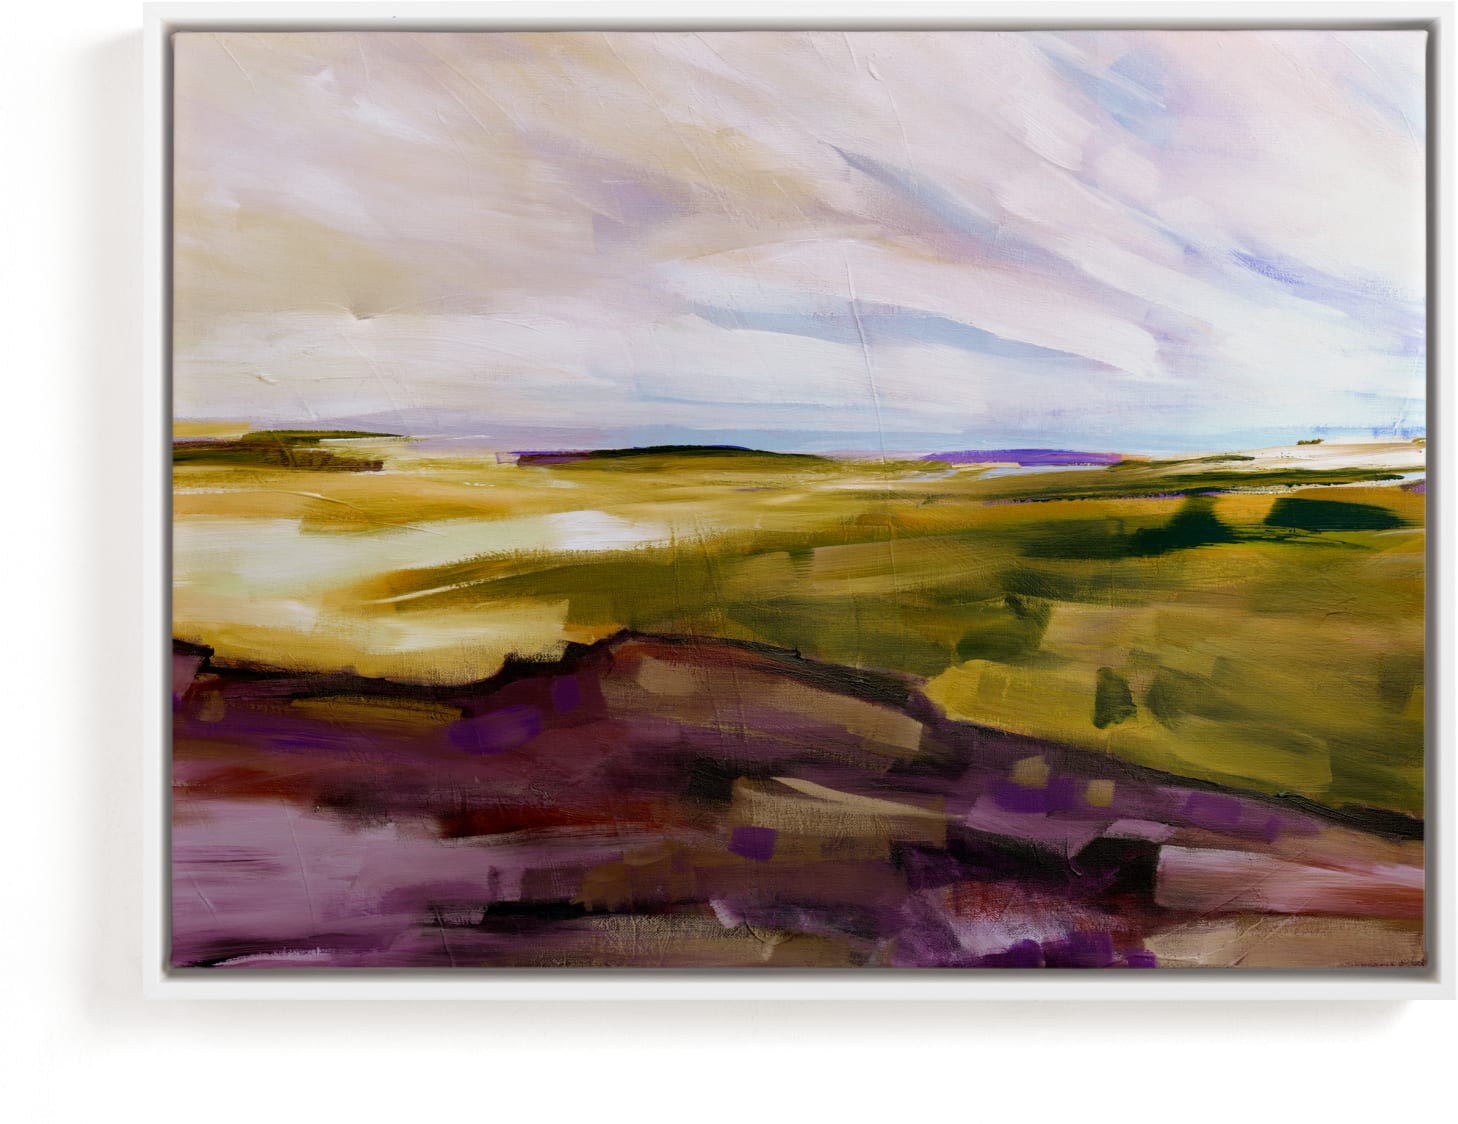 This is a purple, green, non classic colors art by Jen Florentine called Land View.